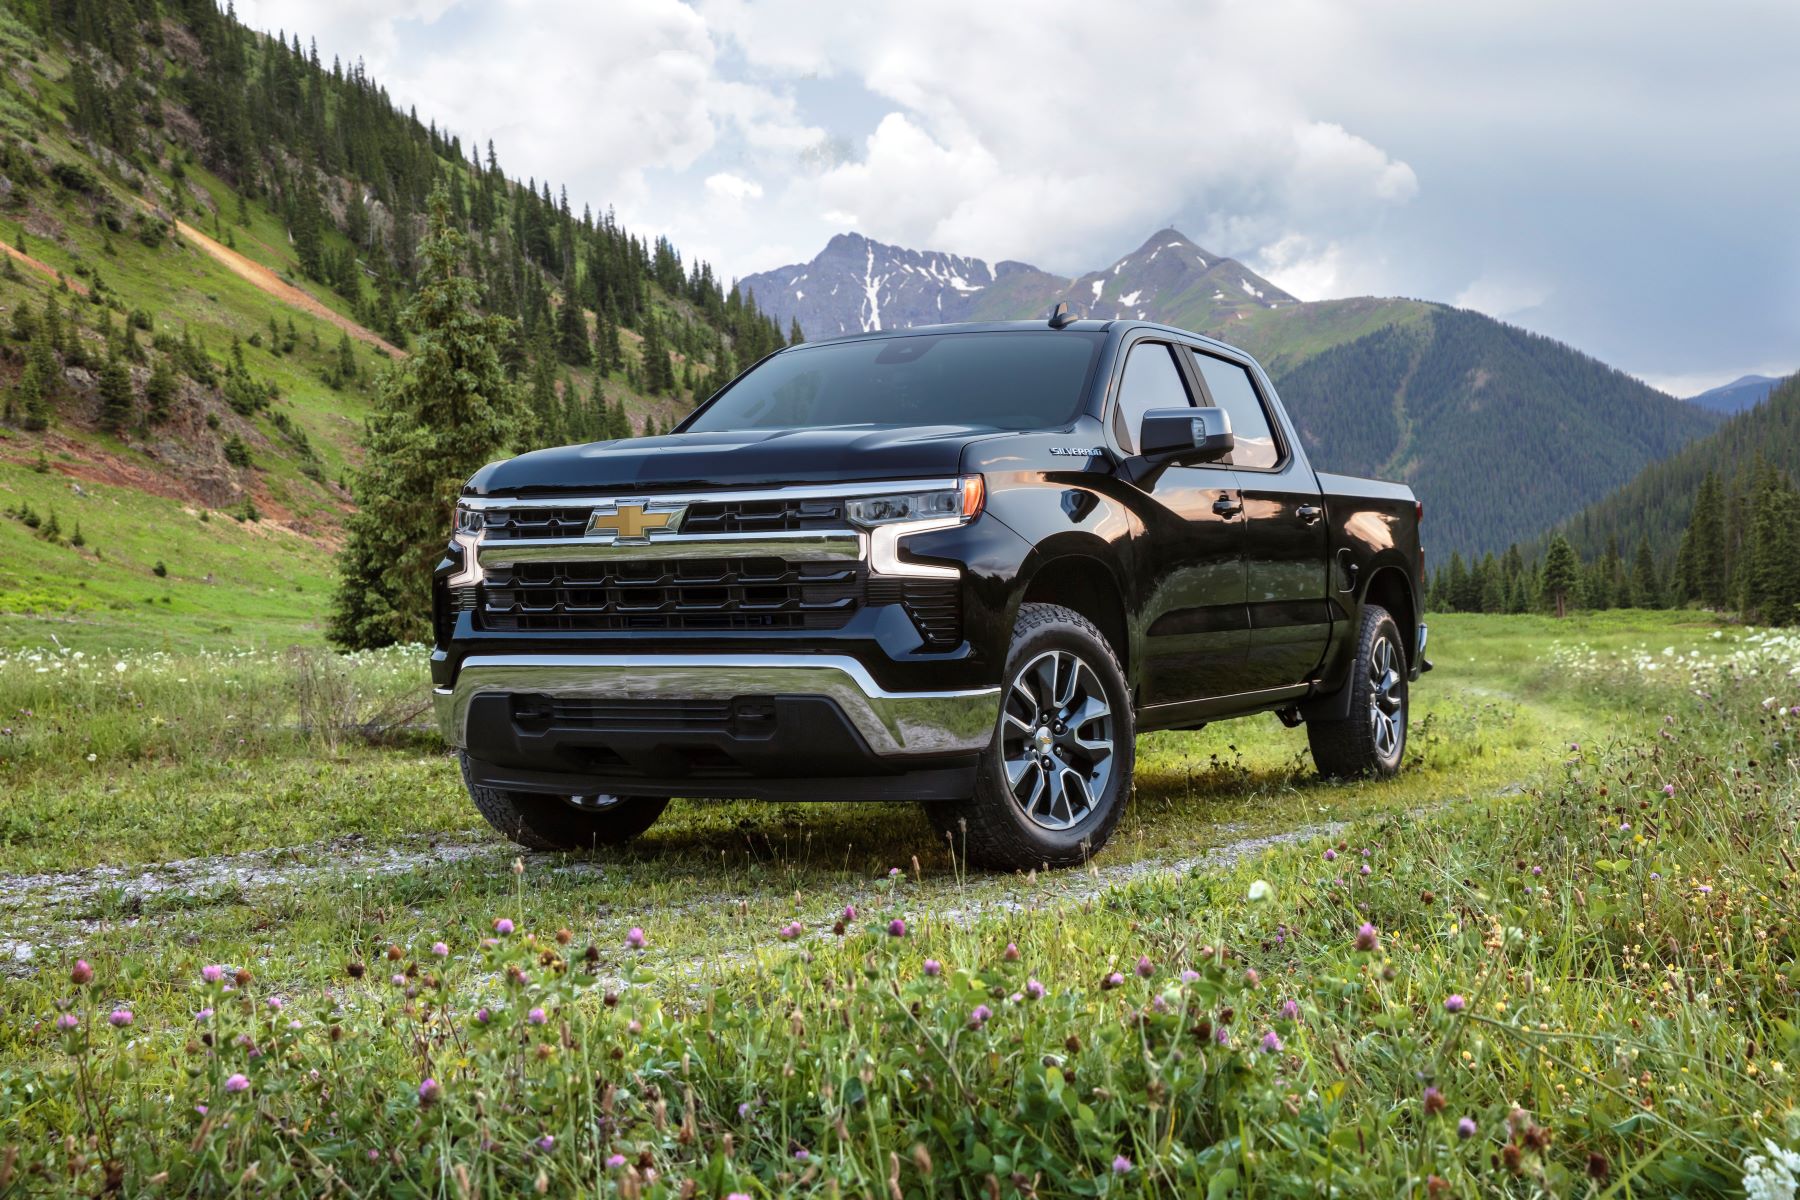 2022 Chevy Silverado transmission problems one of the most common reported issues of the full-size pickup truck